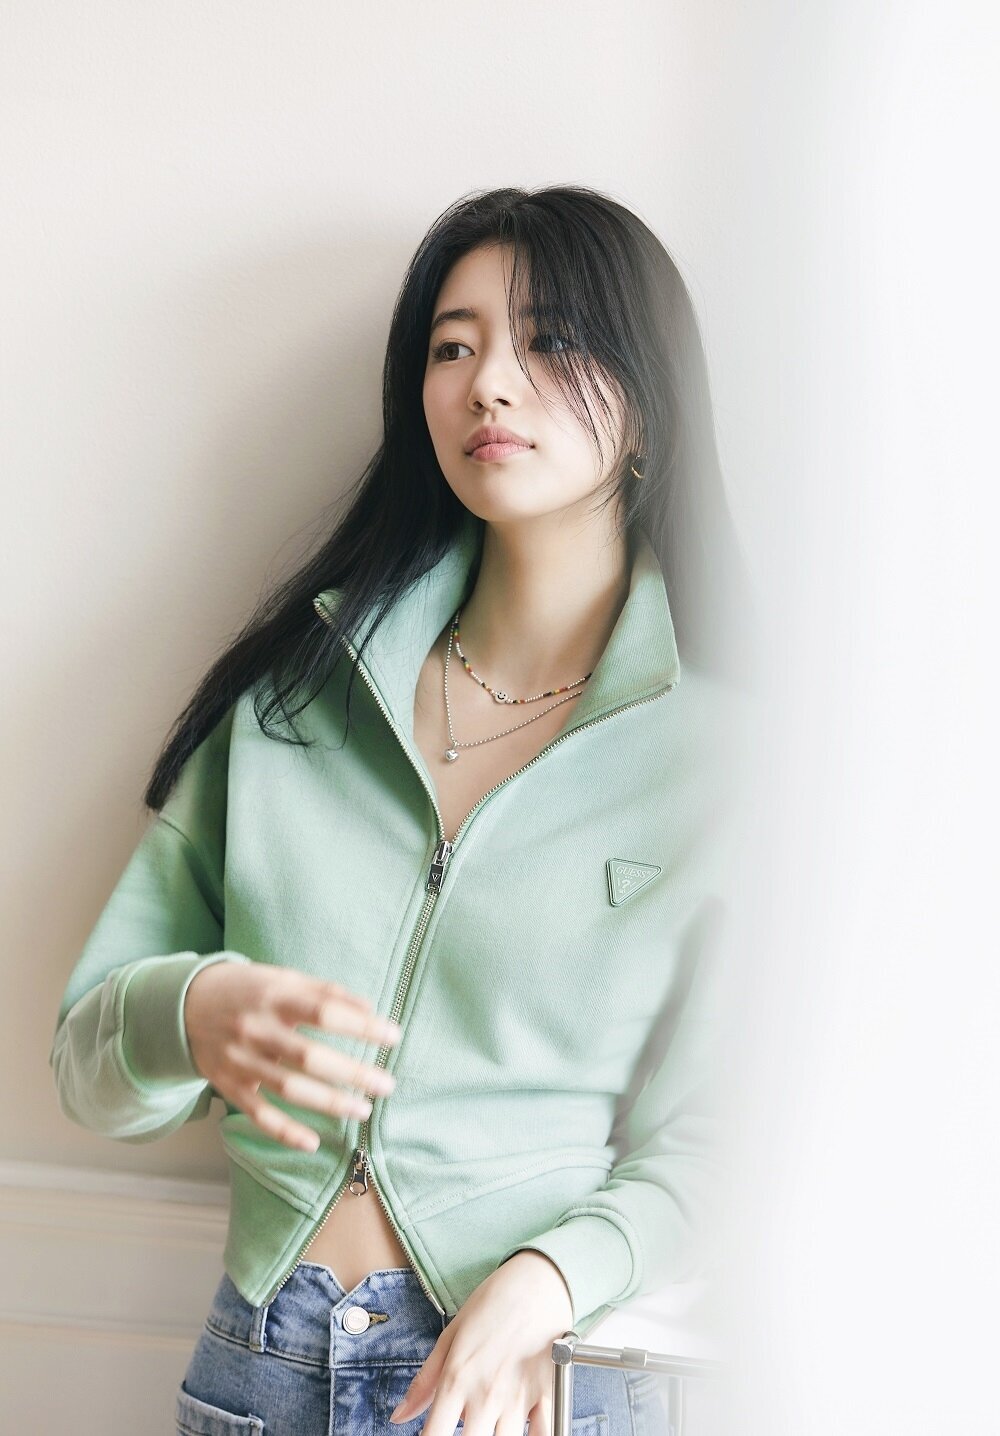 Bae Suzy for Guess 2023 SS Collection 'Swing Into Summer